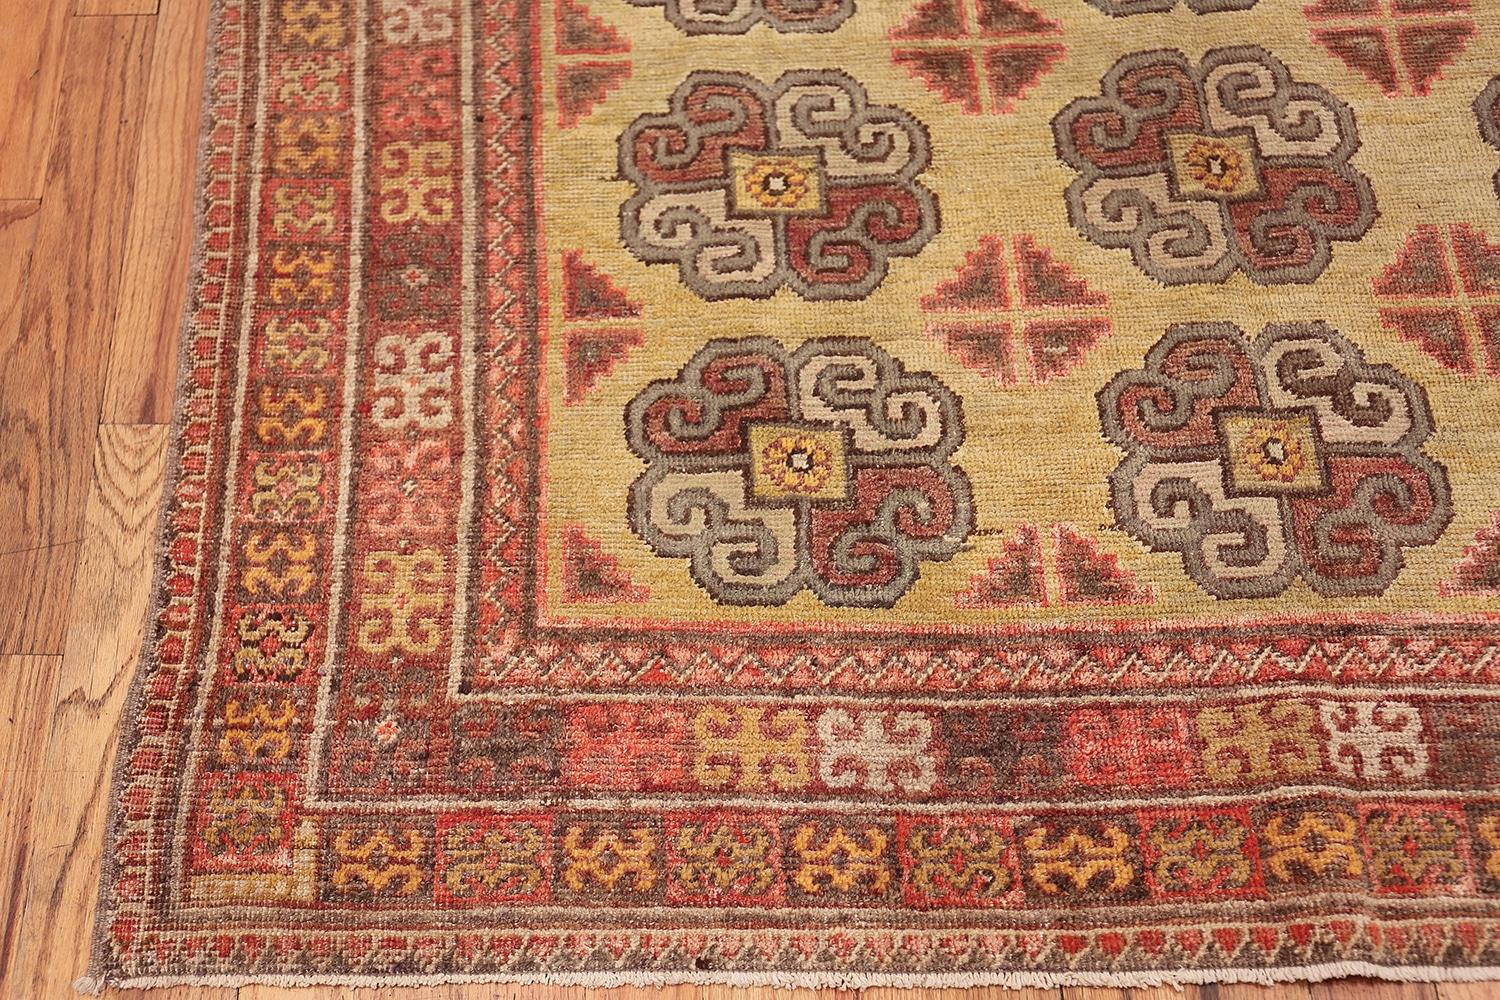 Wool Antique Khotan Rug. Size: 6 ft 1 in x 11 ft 10 in For Sale